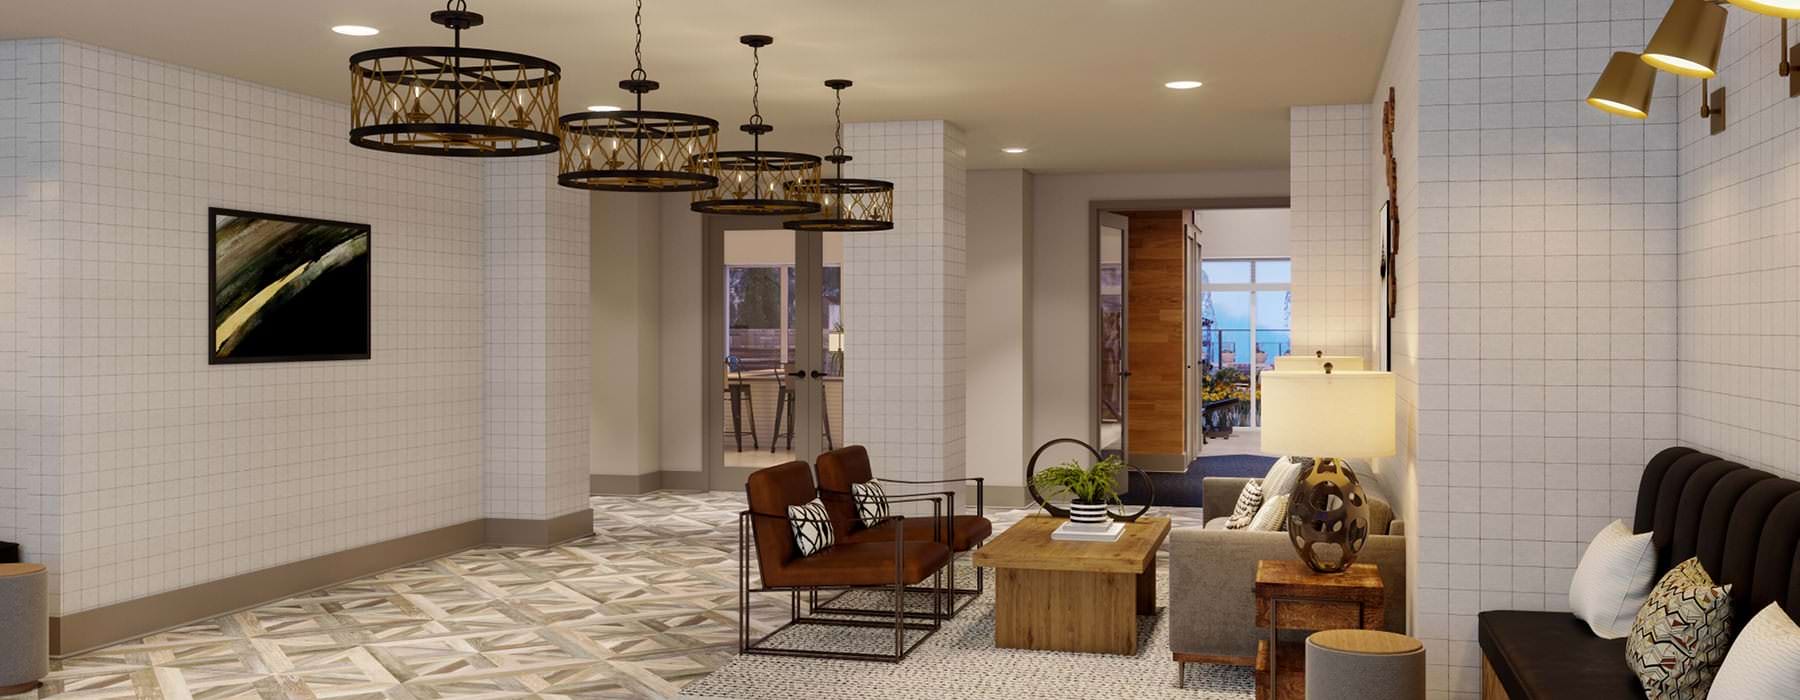 chandeliers and recessed lighting in roomy lobby